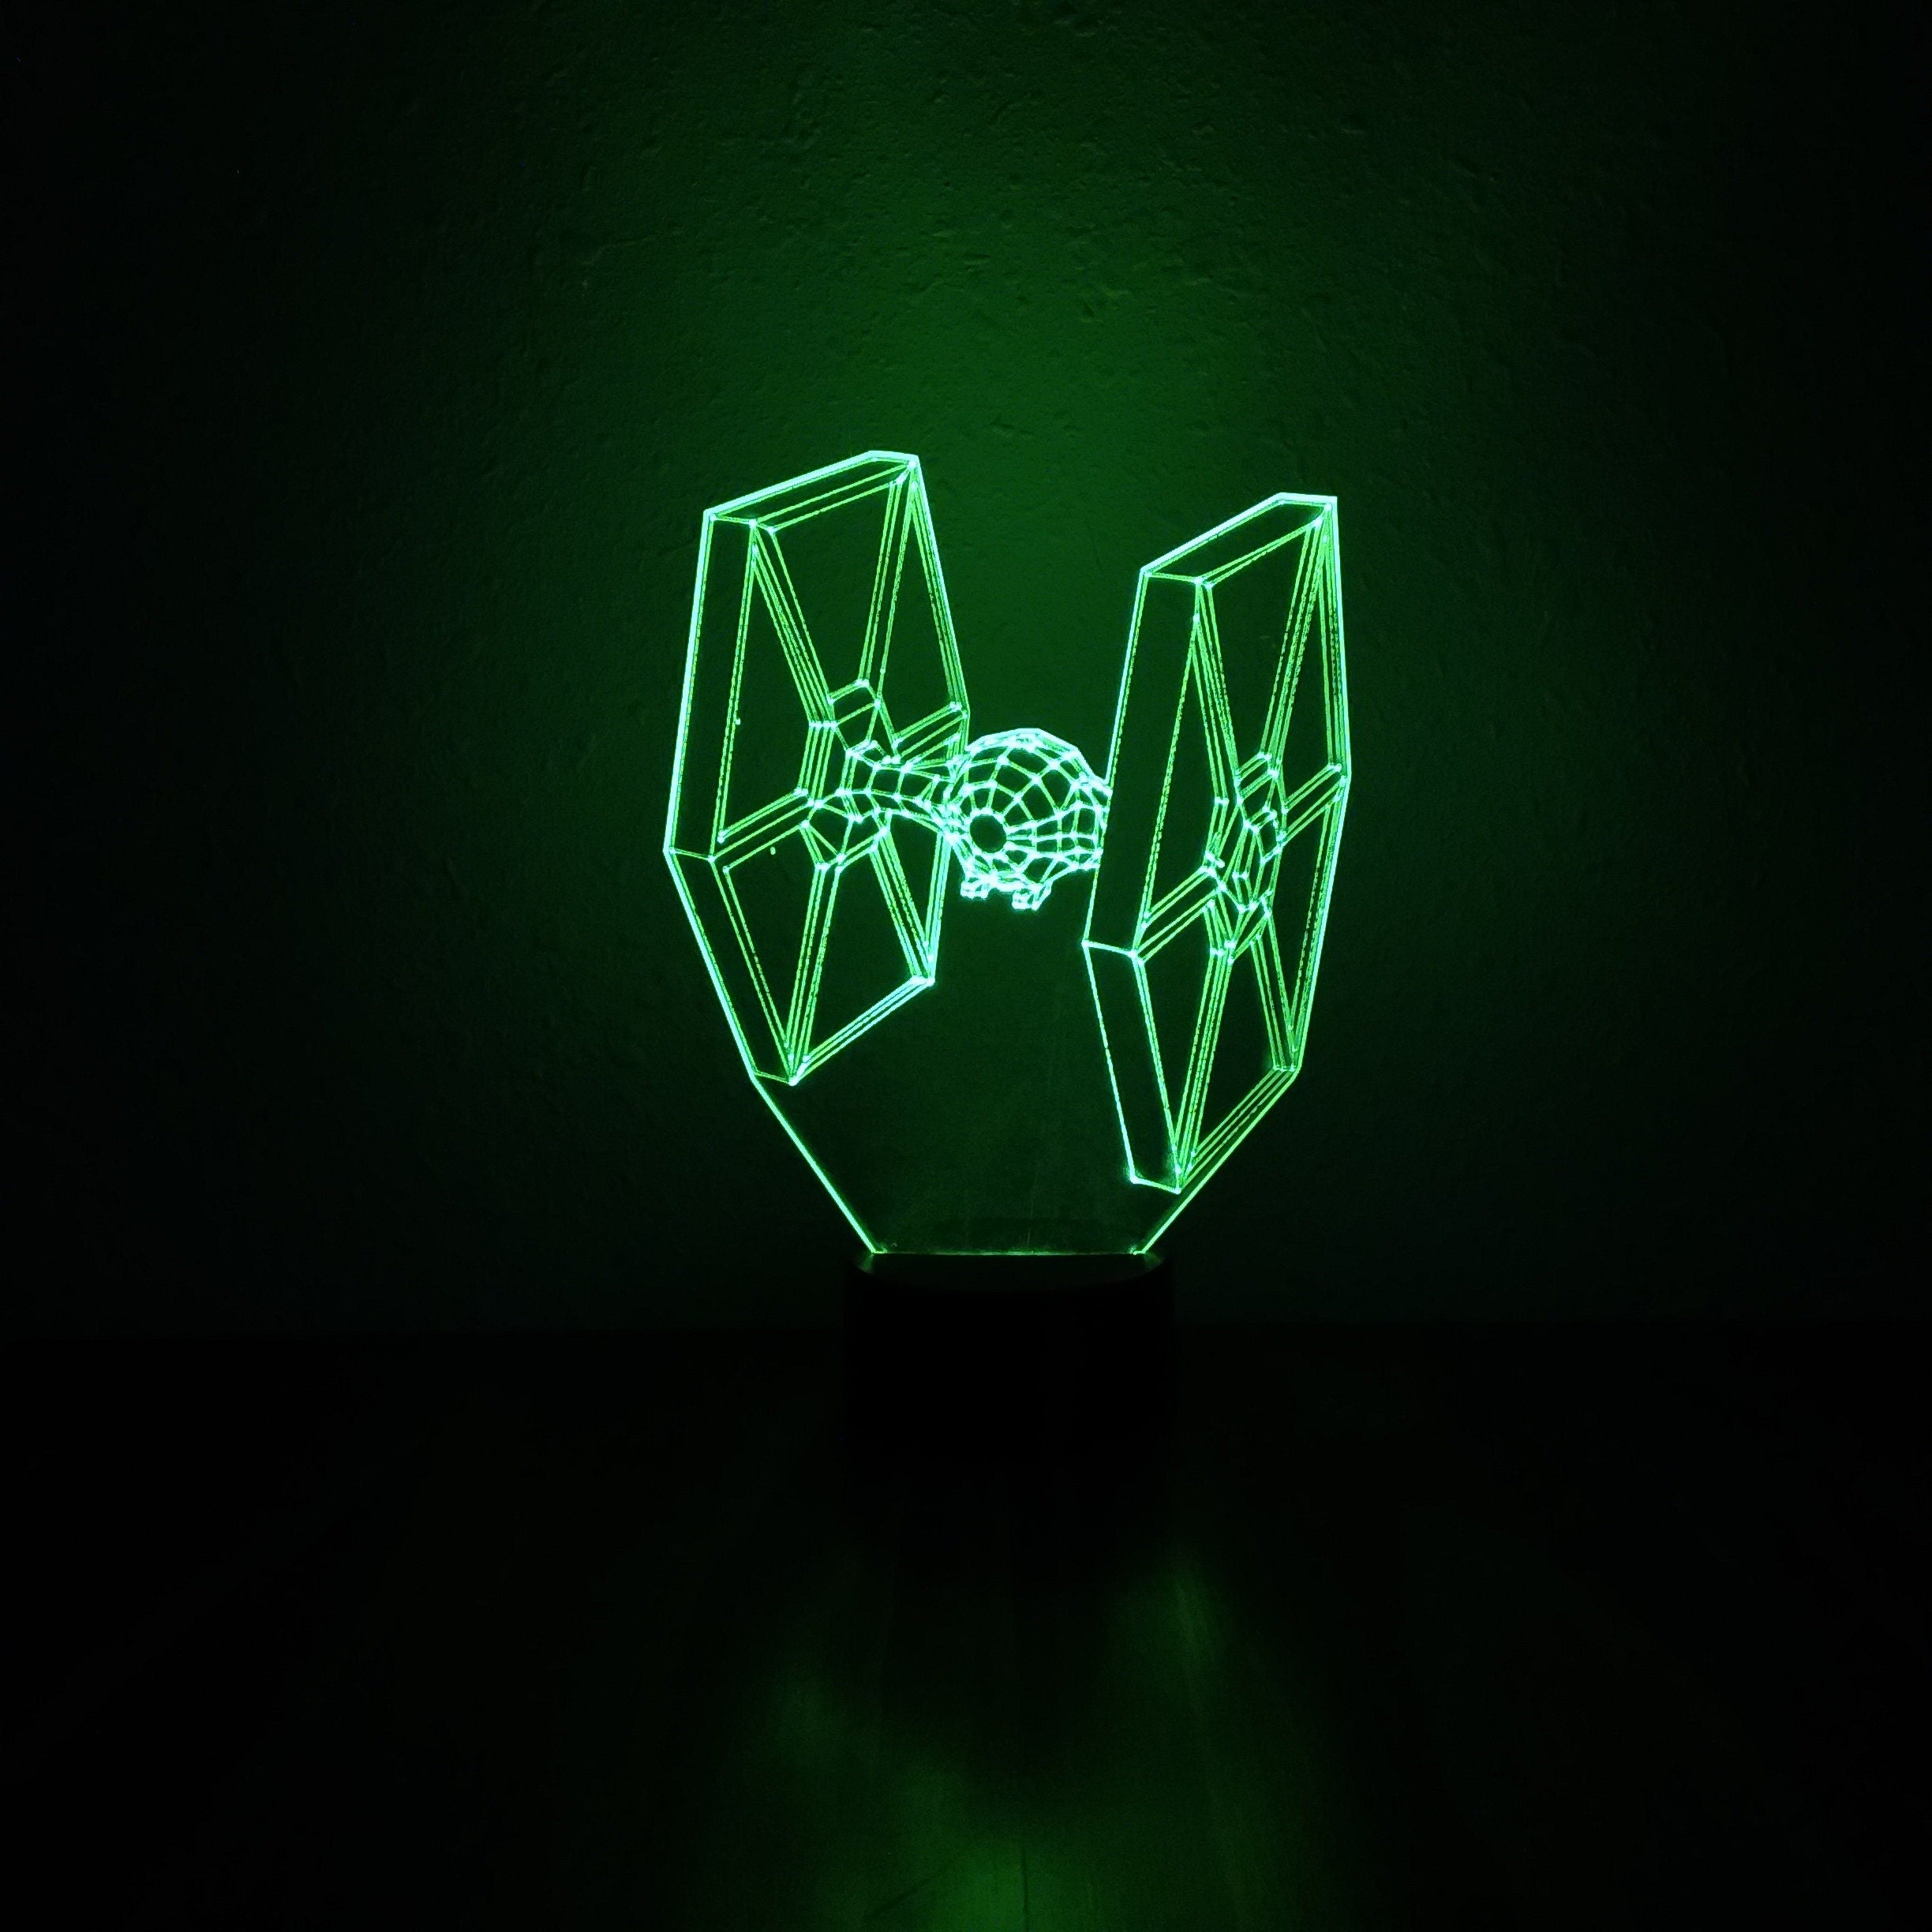 Awesome "Star Wars Tie Fighter" 3D LED Lamp (1247) - FREE Shipping!